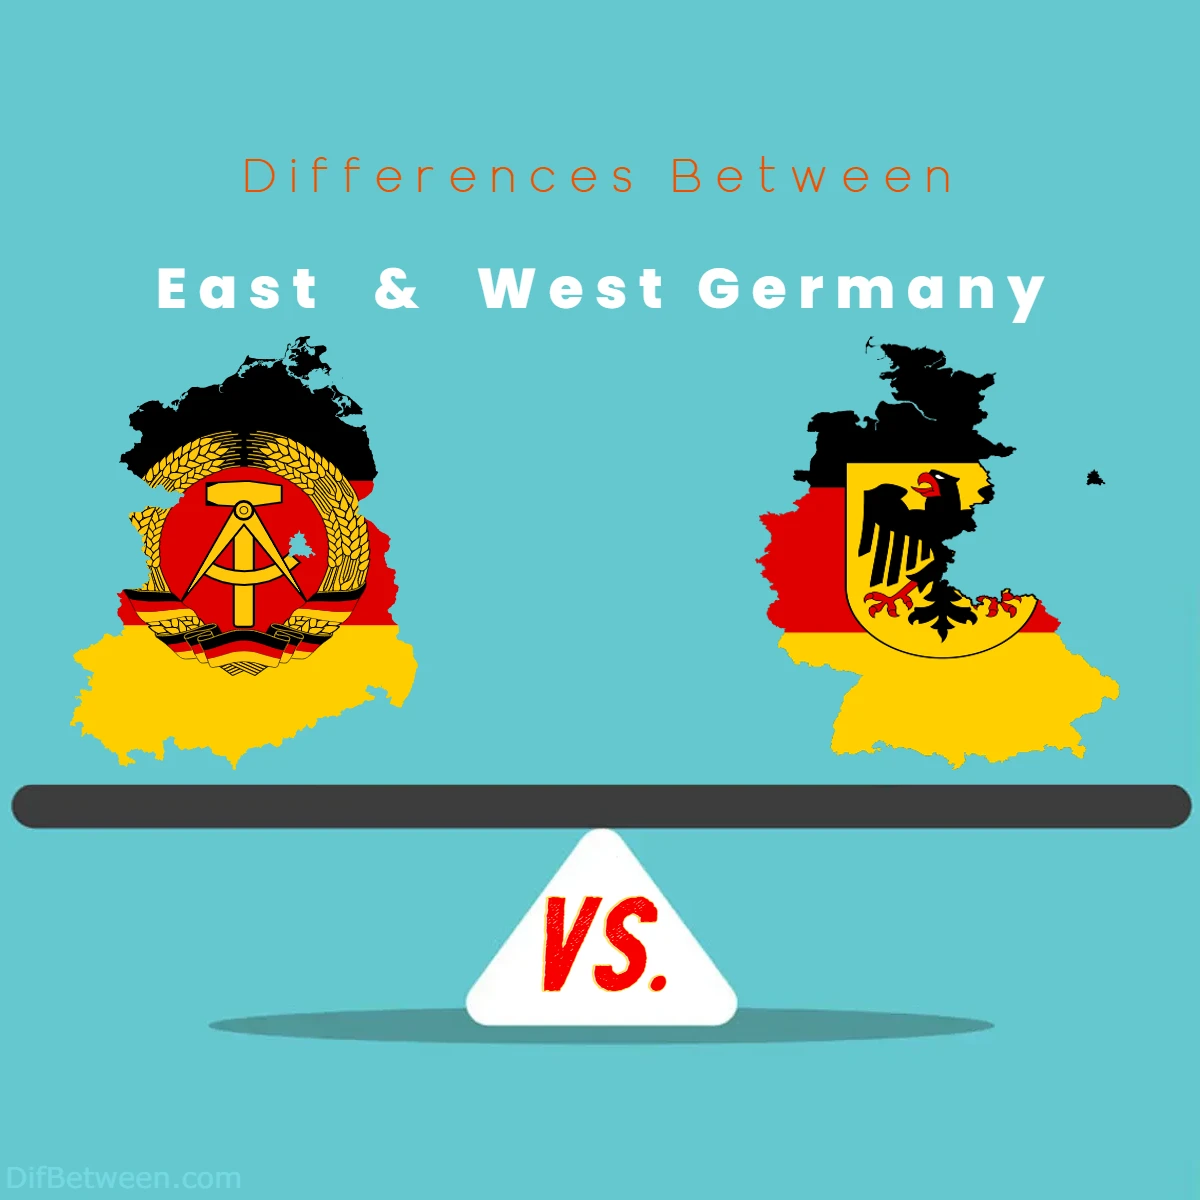 Differences Between East vs West Germany